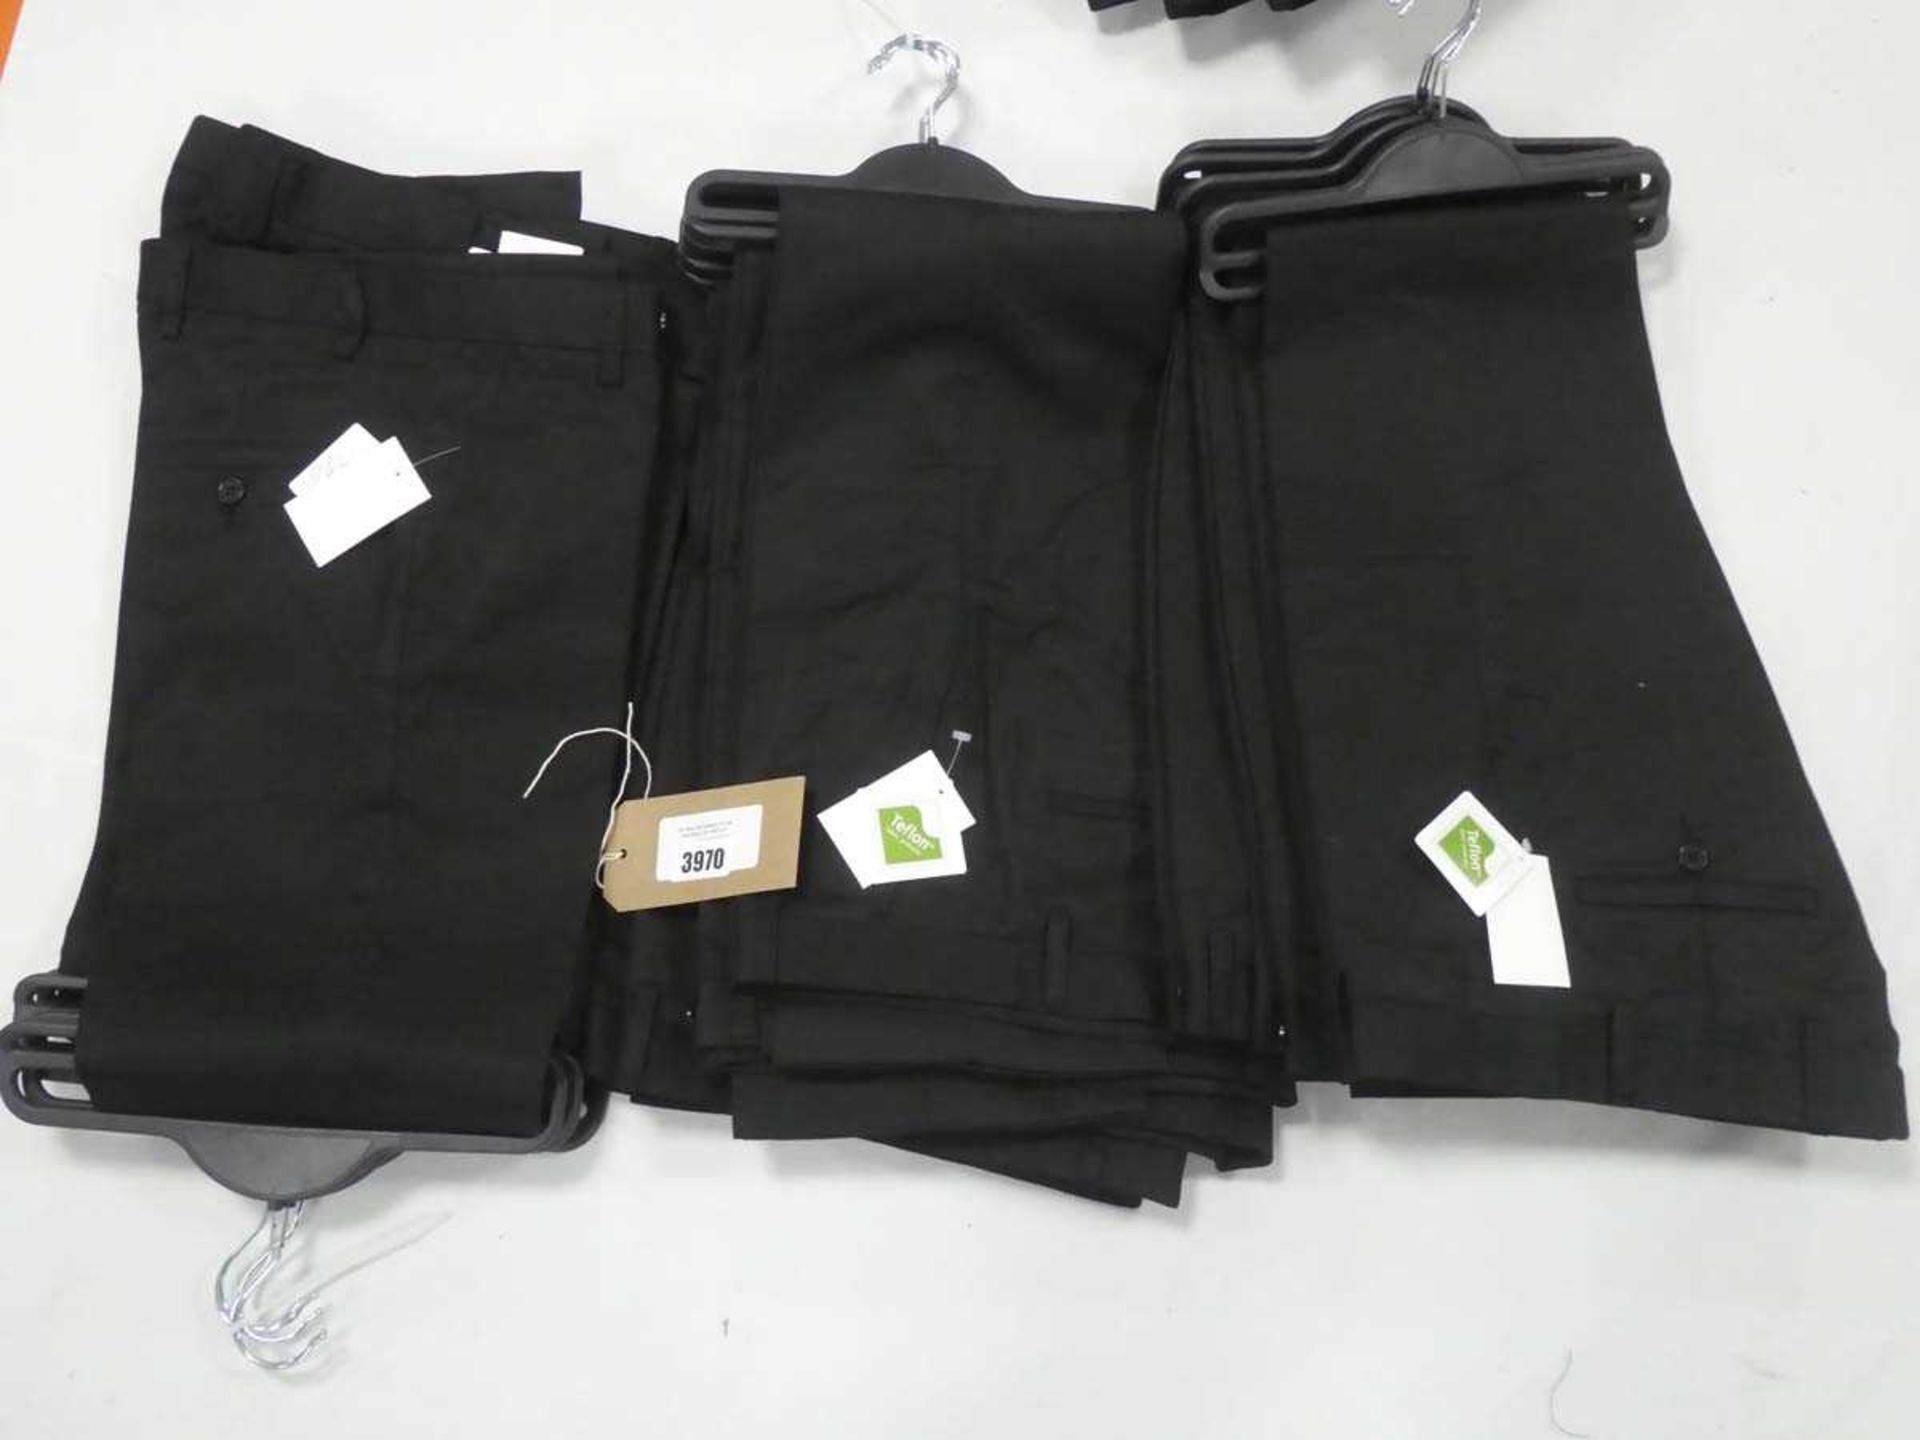 +VAT 15 pairs of Simmonds school trousers in black, size 29R